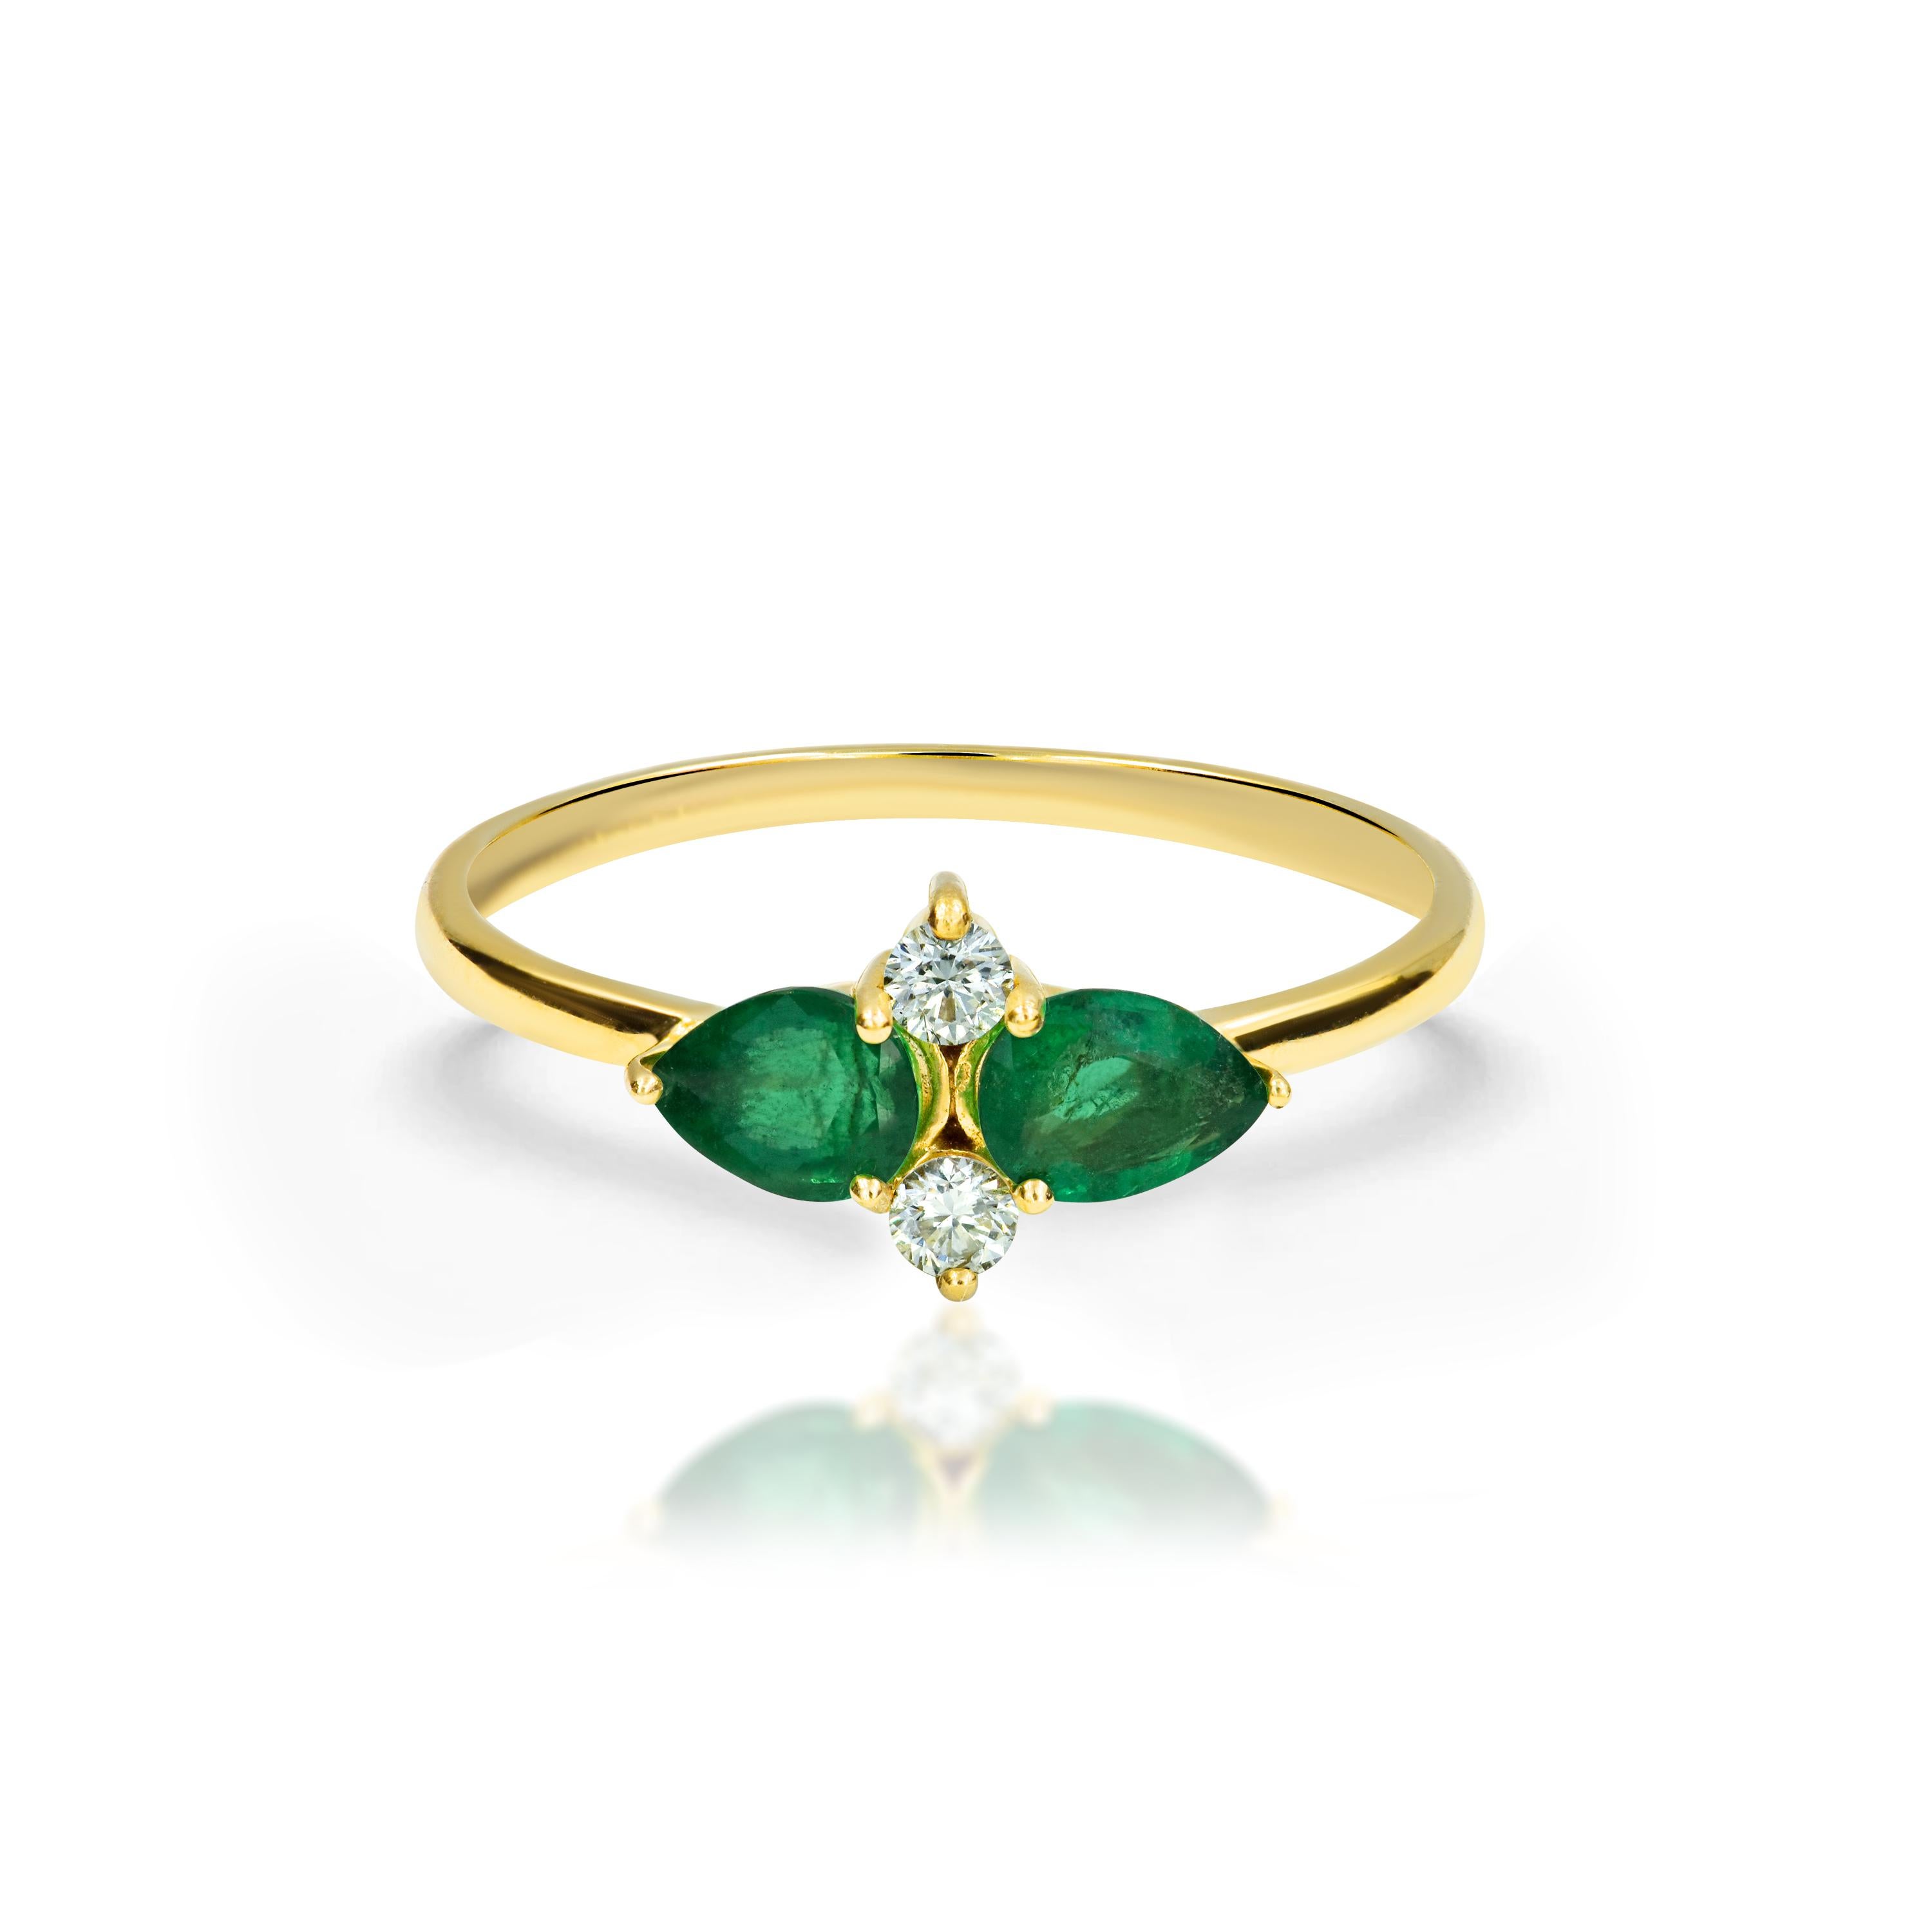 For Sale:  18k Gold Pear Shape 0.56 Carat Emerald and Diamond Engagement Ring 3